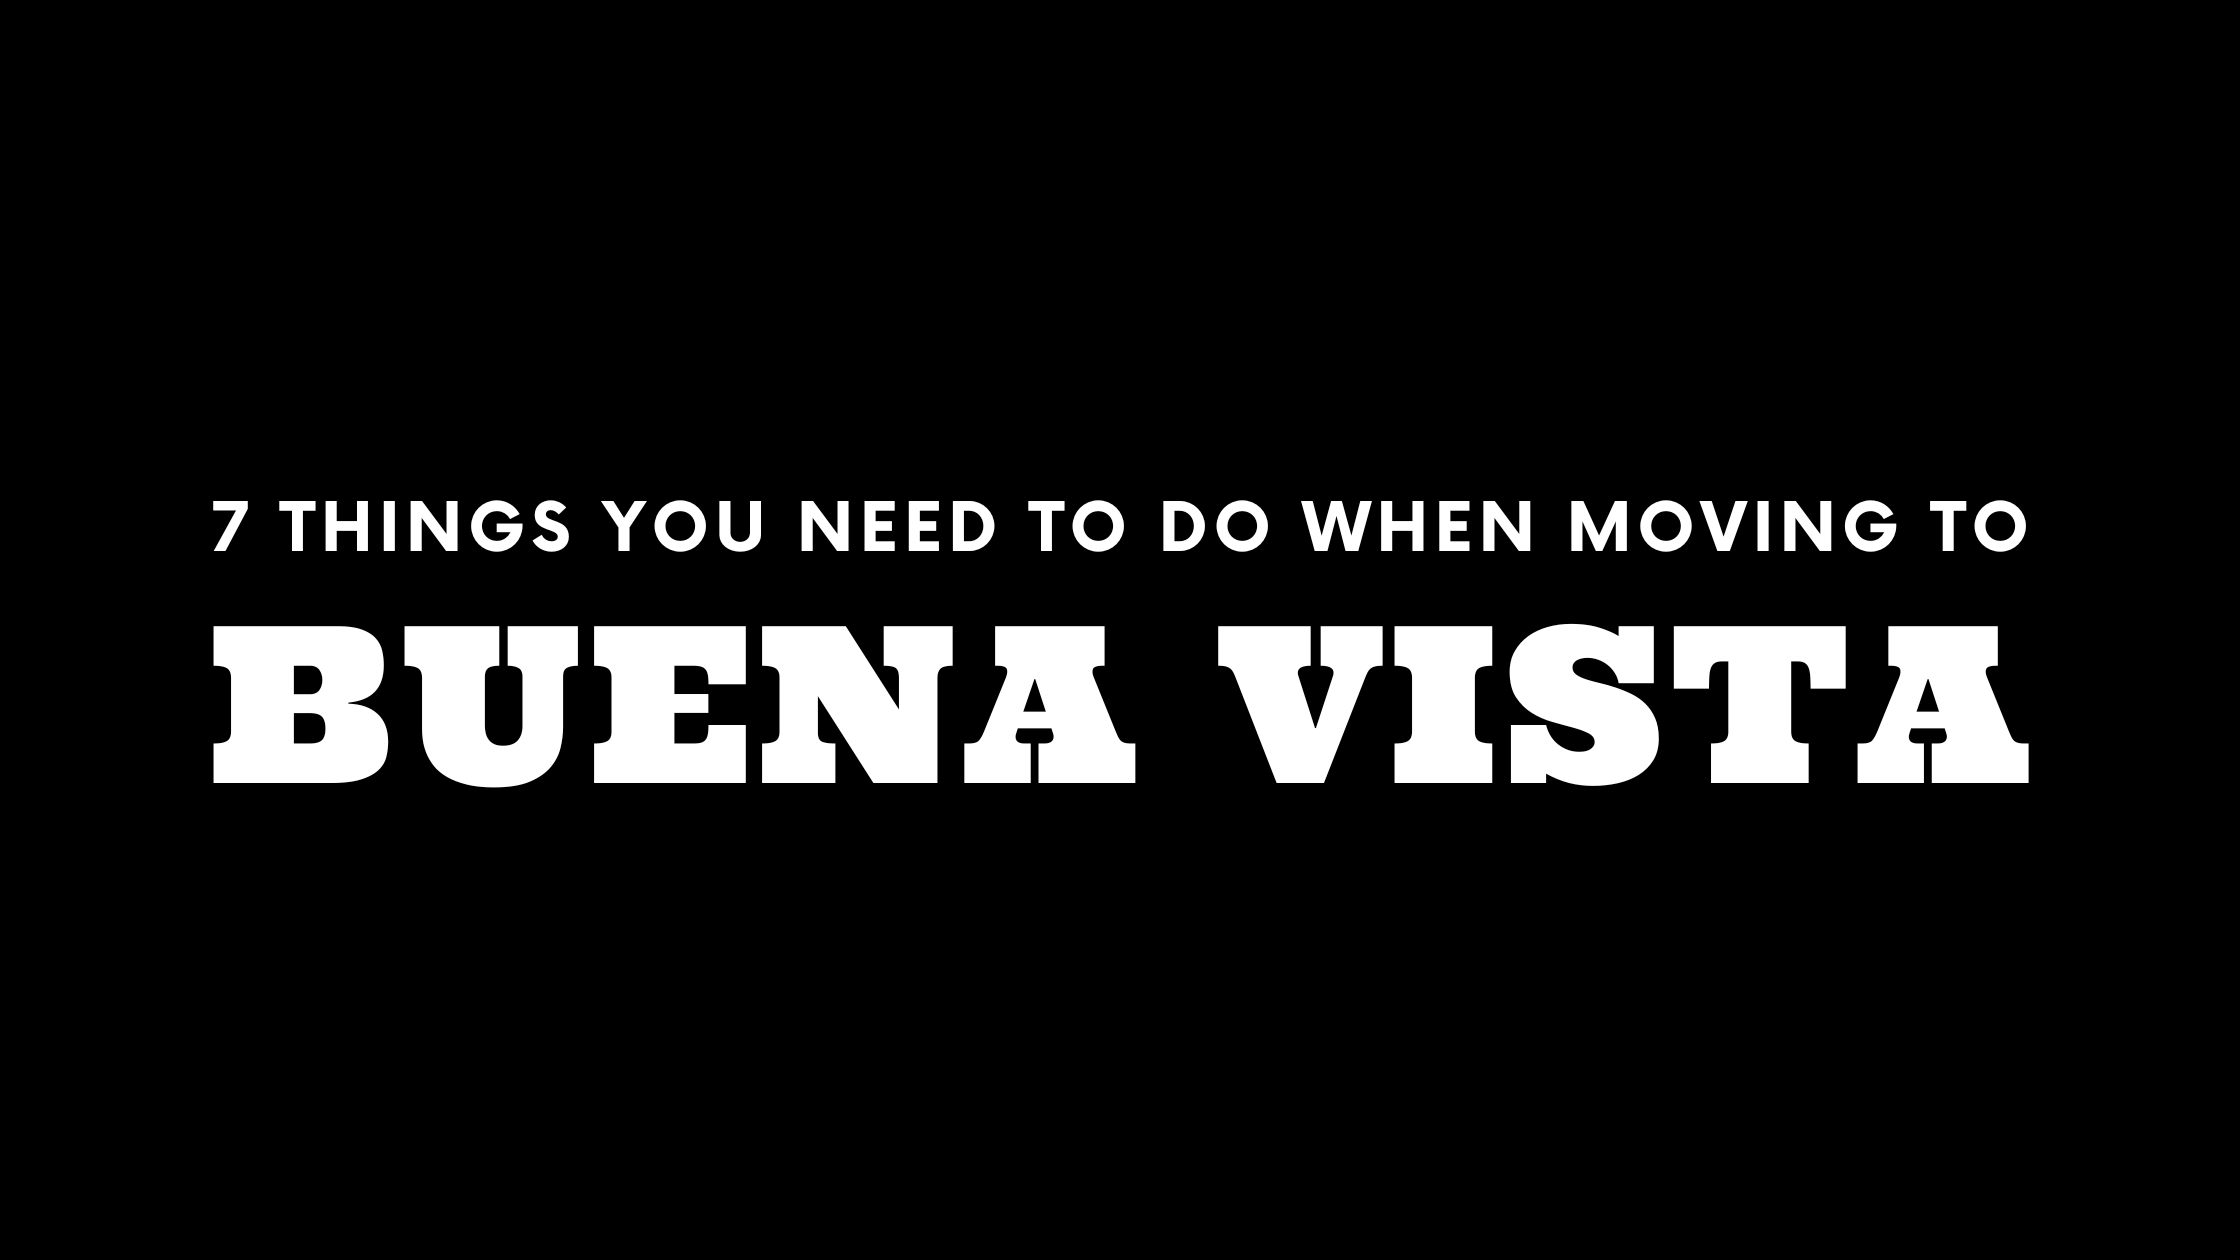 Moving to Buena Vista? 7 Things You Need To Do Immediately!